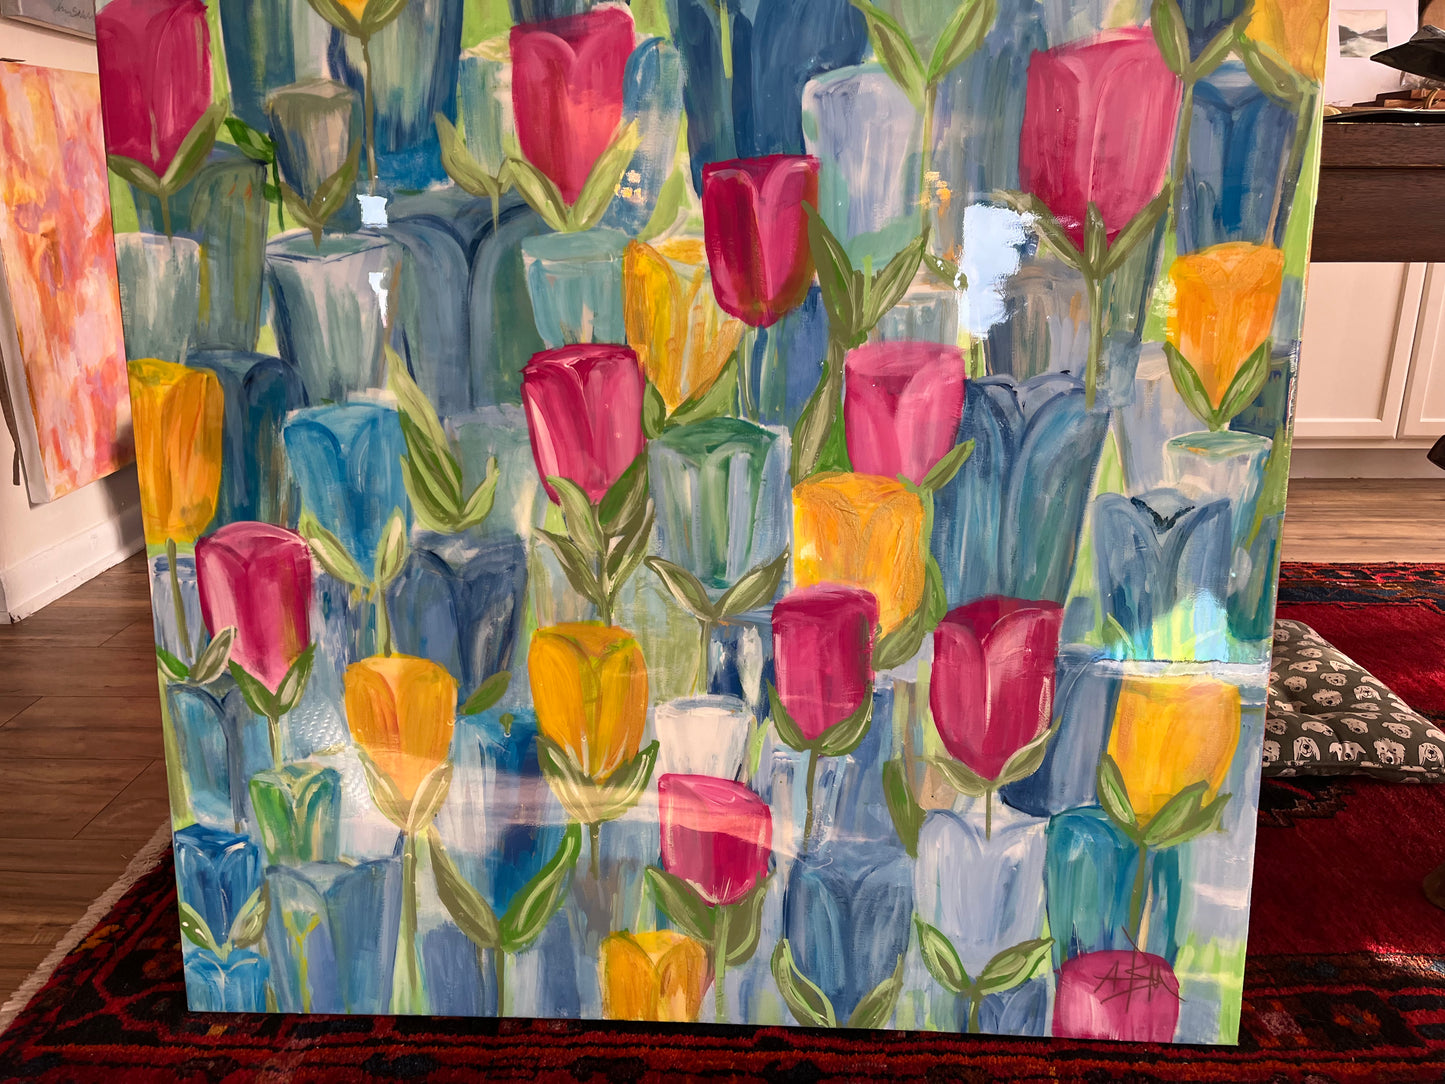 Tip Toe Through the Tulips by Allison Brown